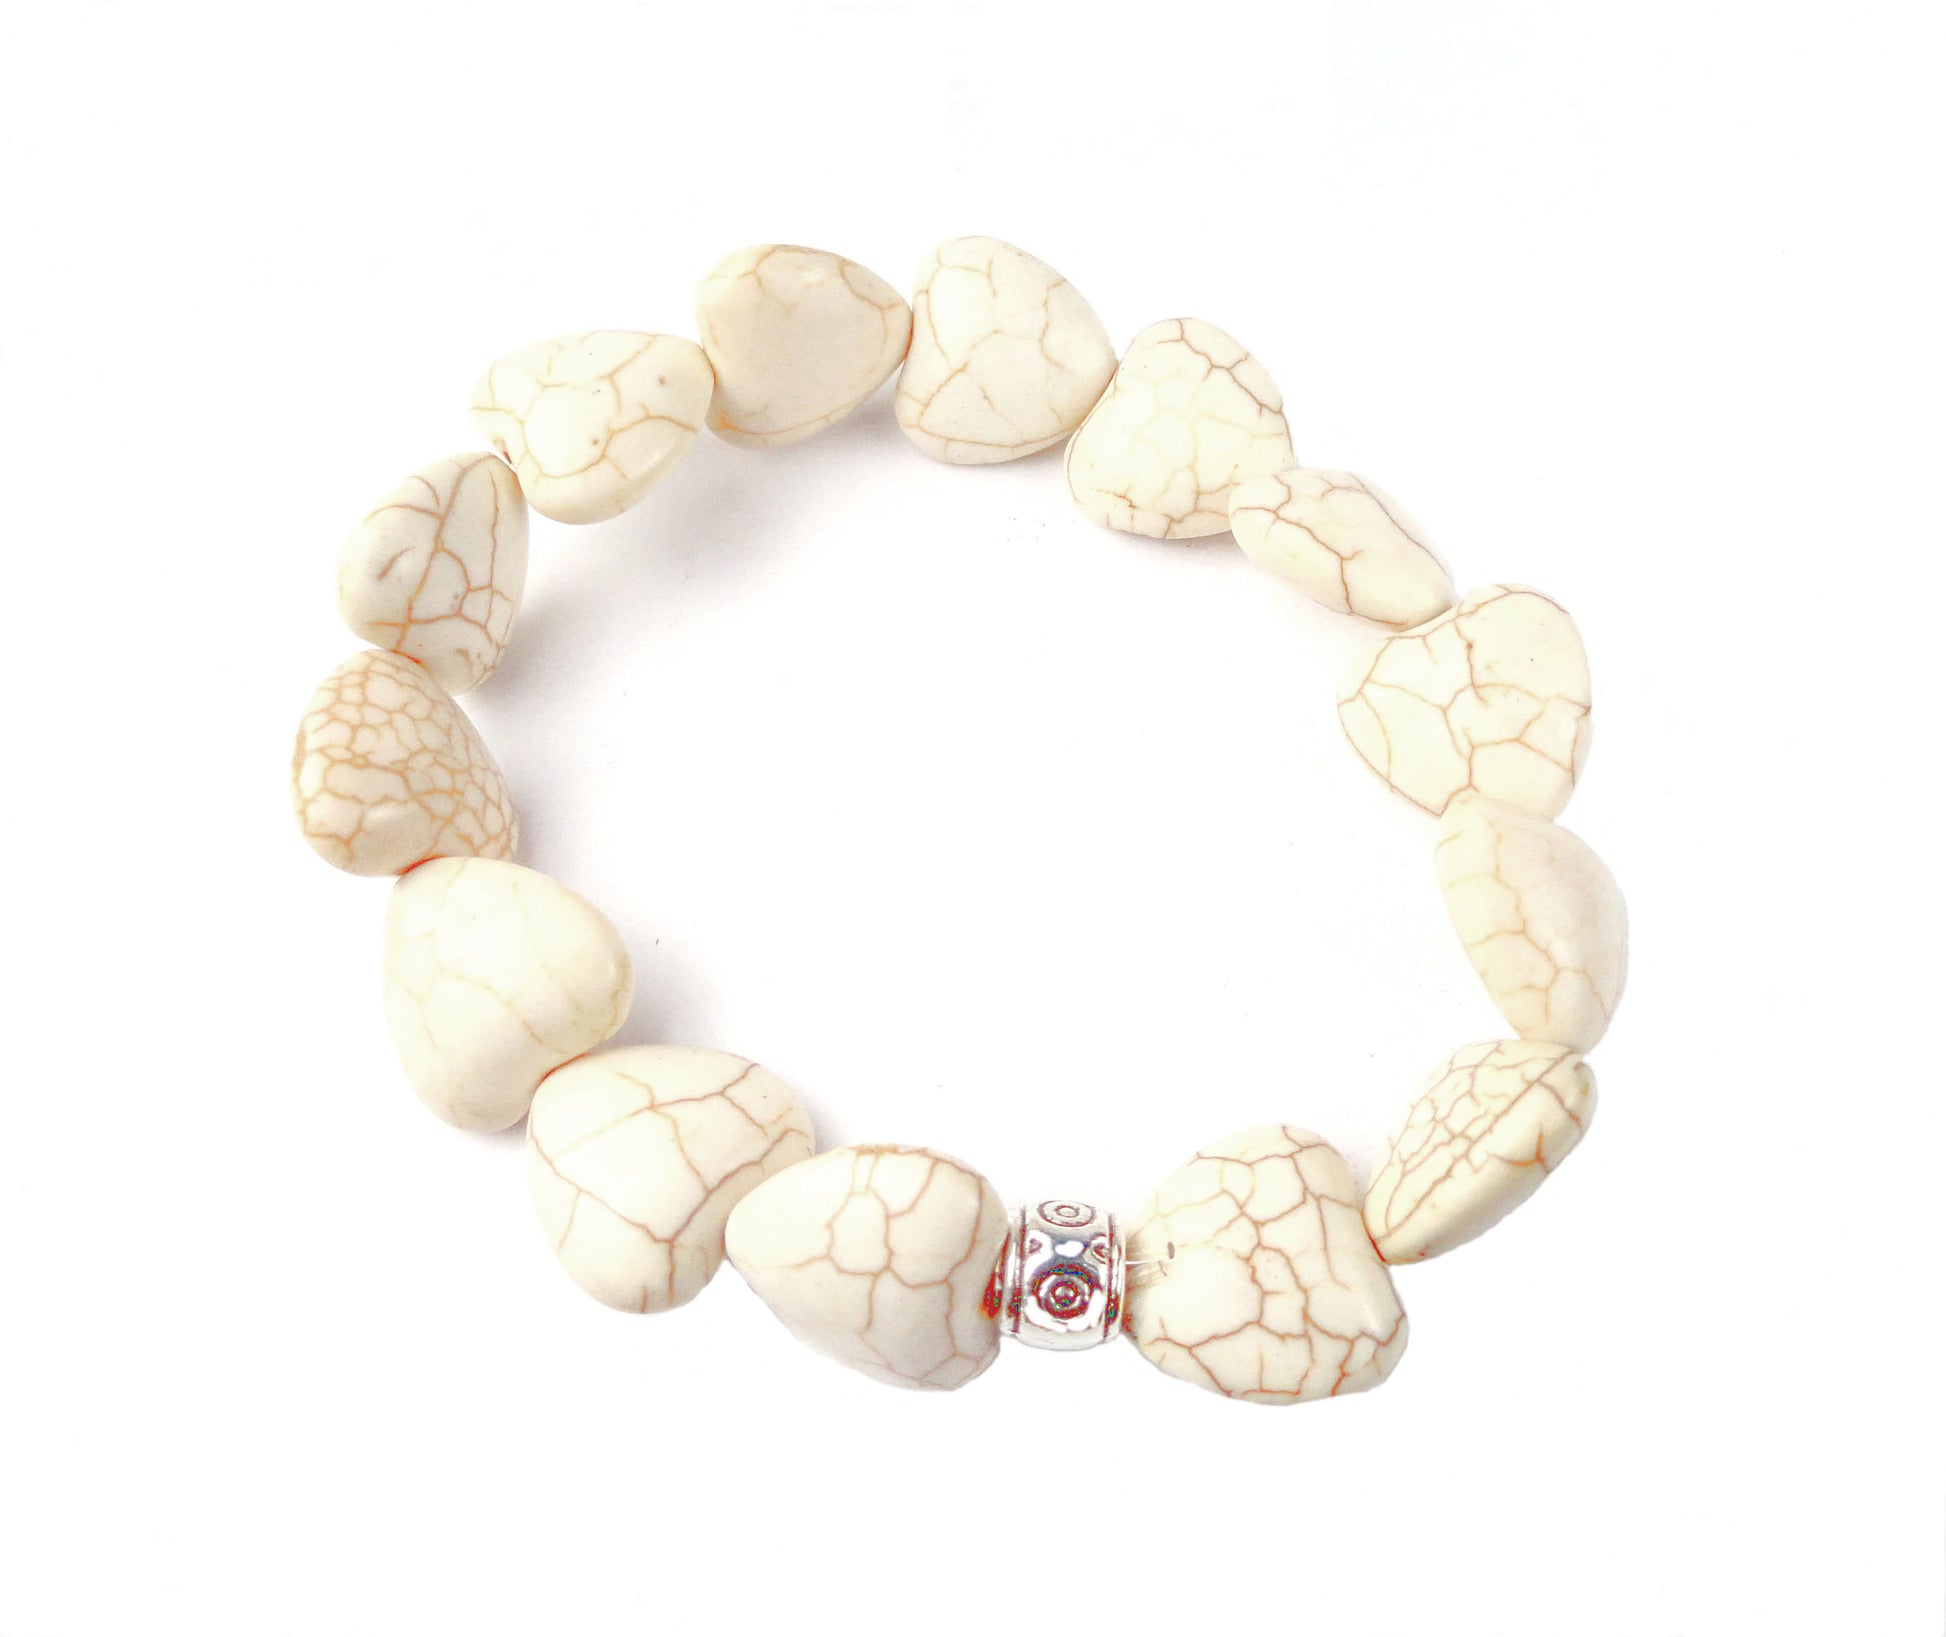 Puffy Hearts - Ivory Stone - Low Tide Island Designs